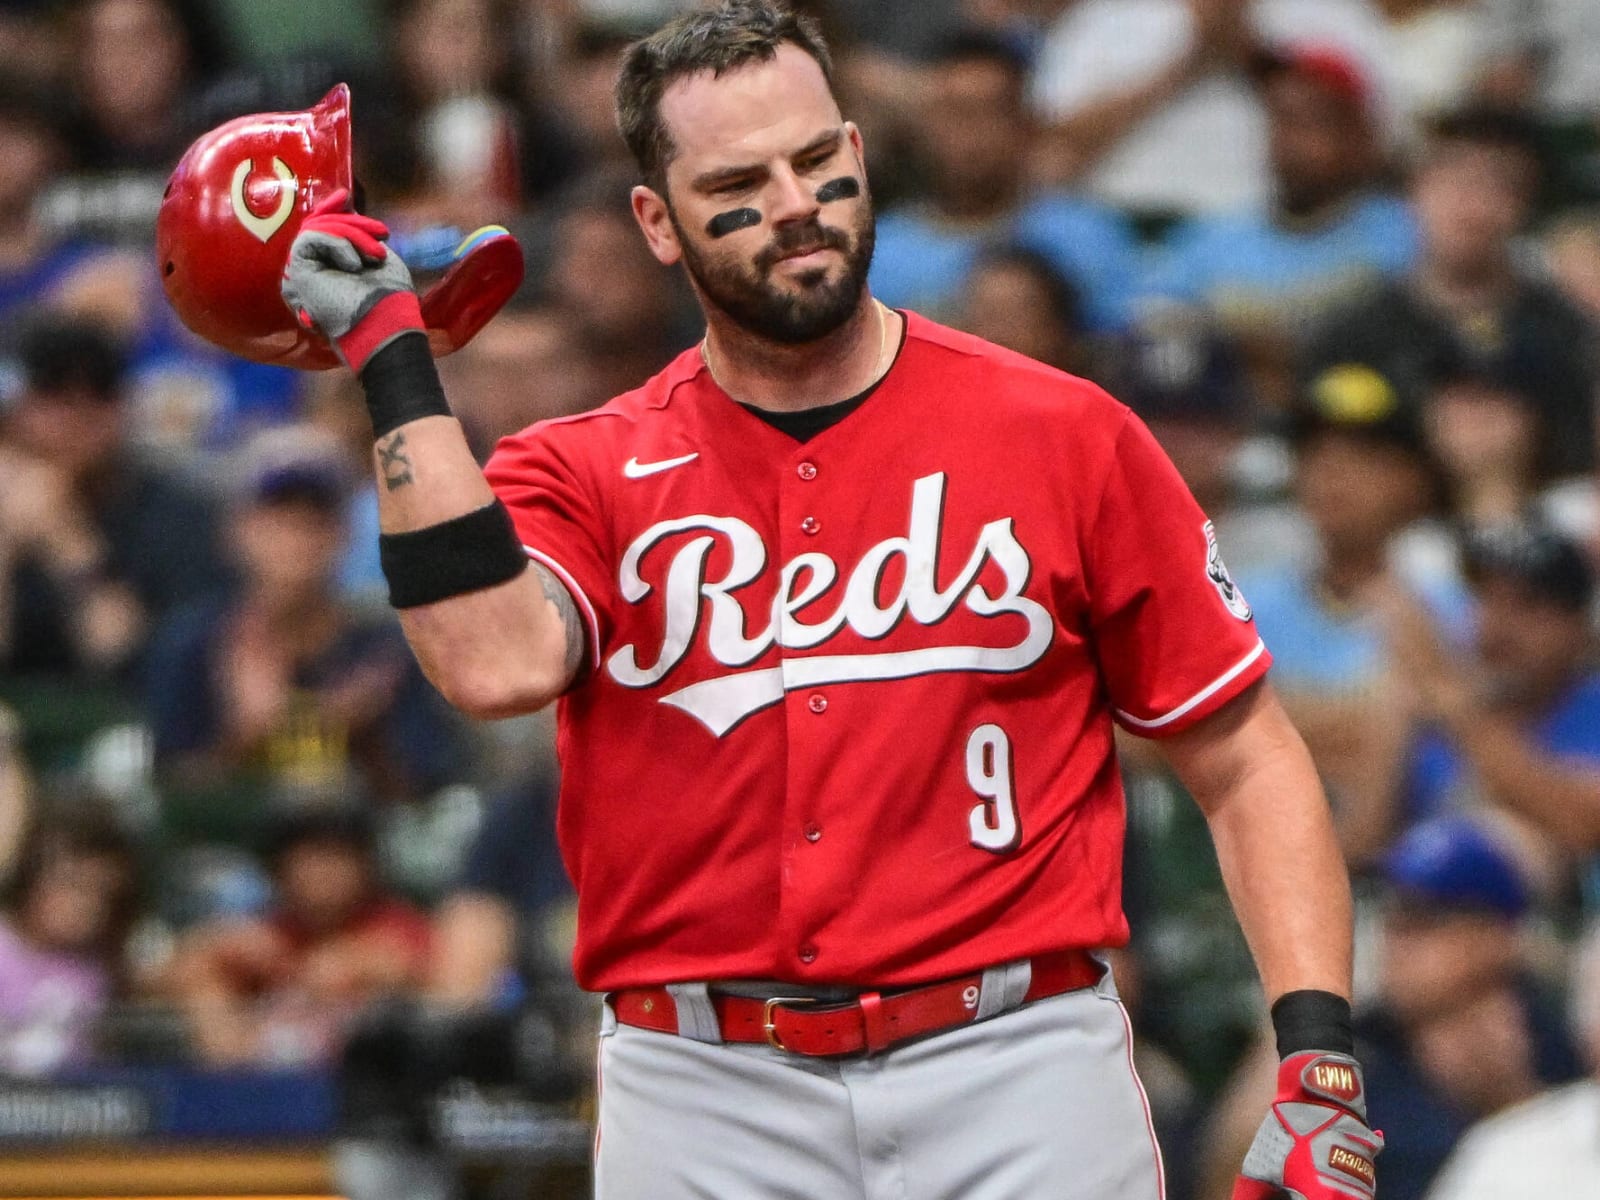 Eugenio Suárez excited after the Cincinnati Reds signed Mike Moustakas